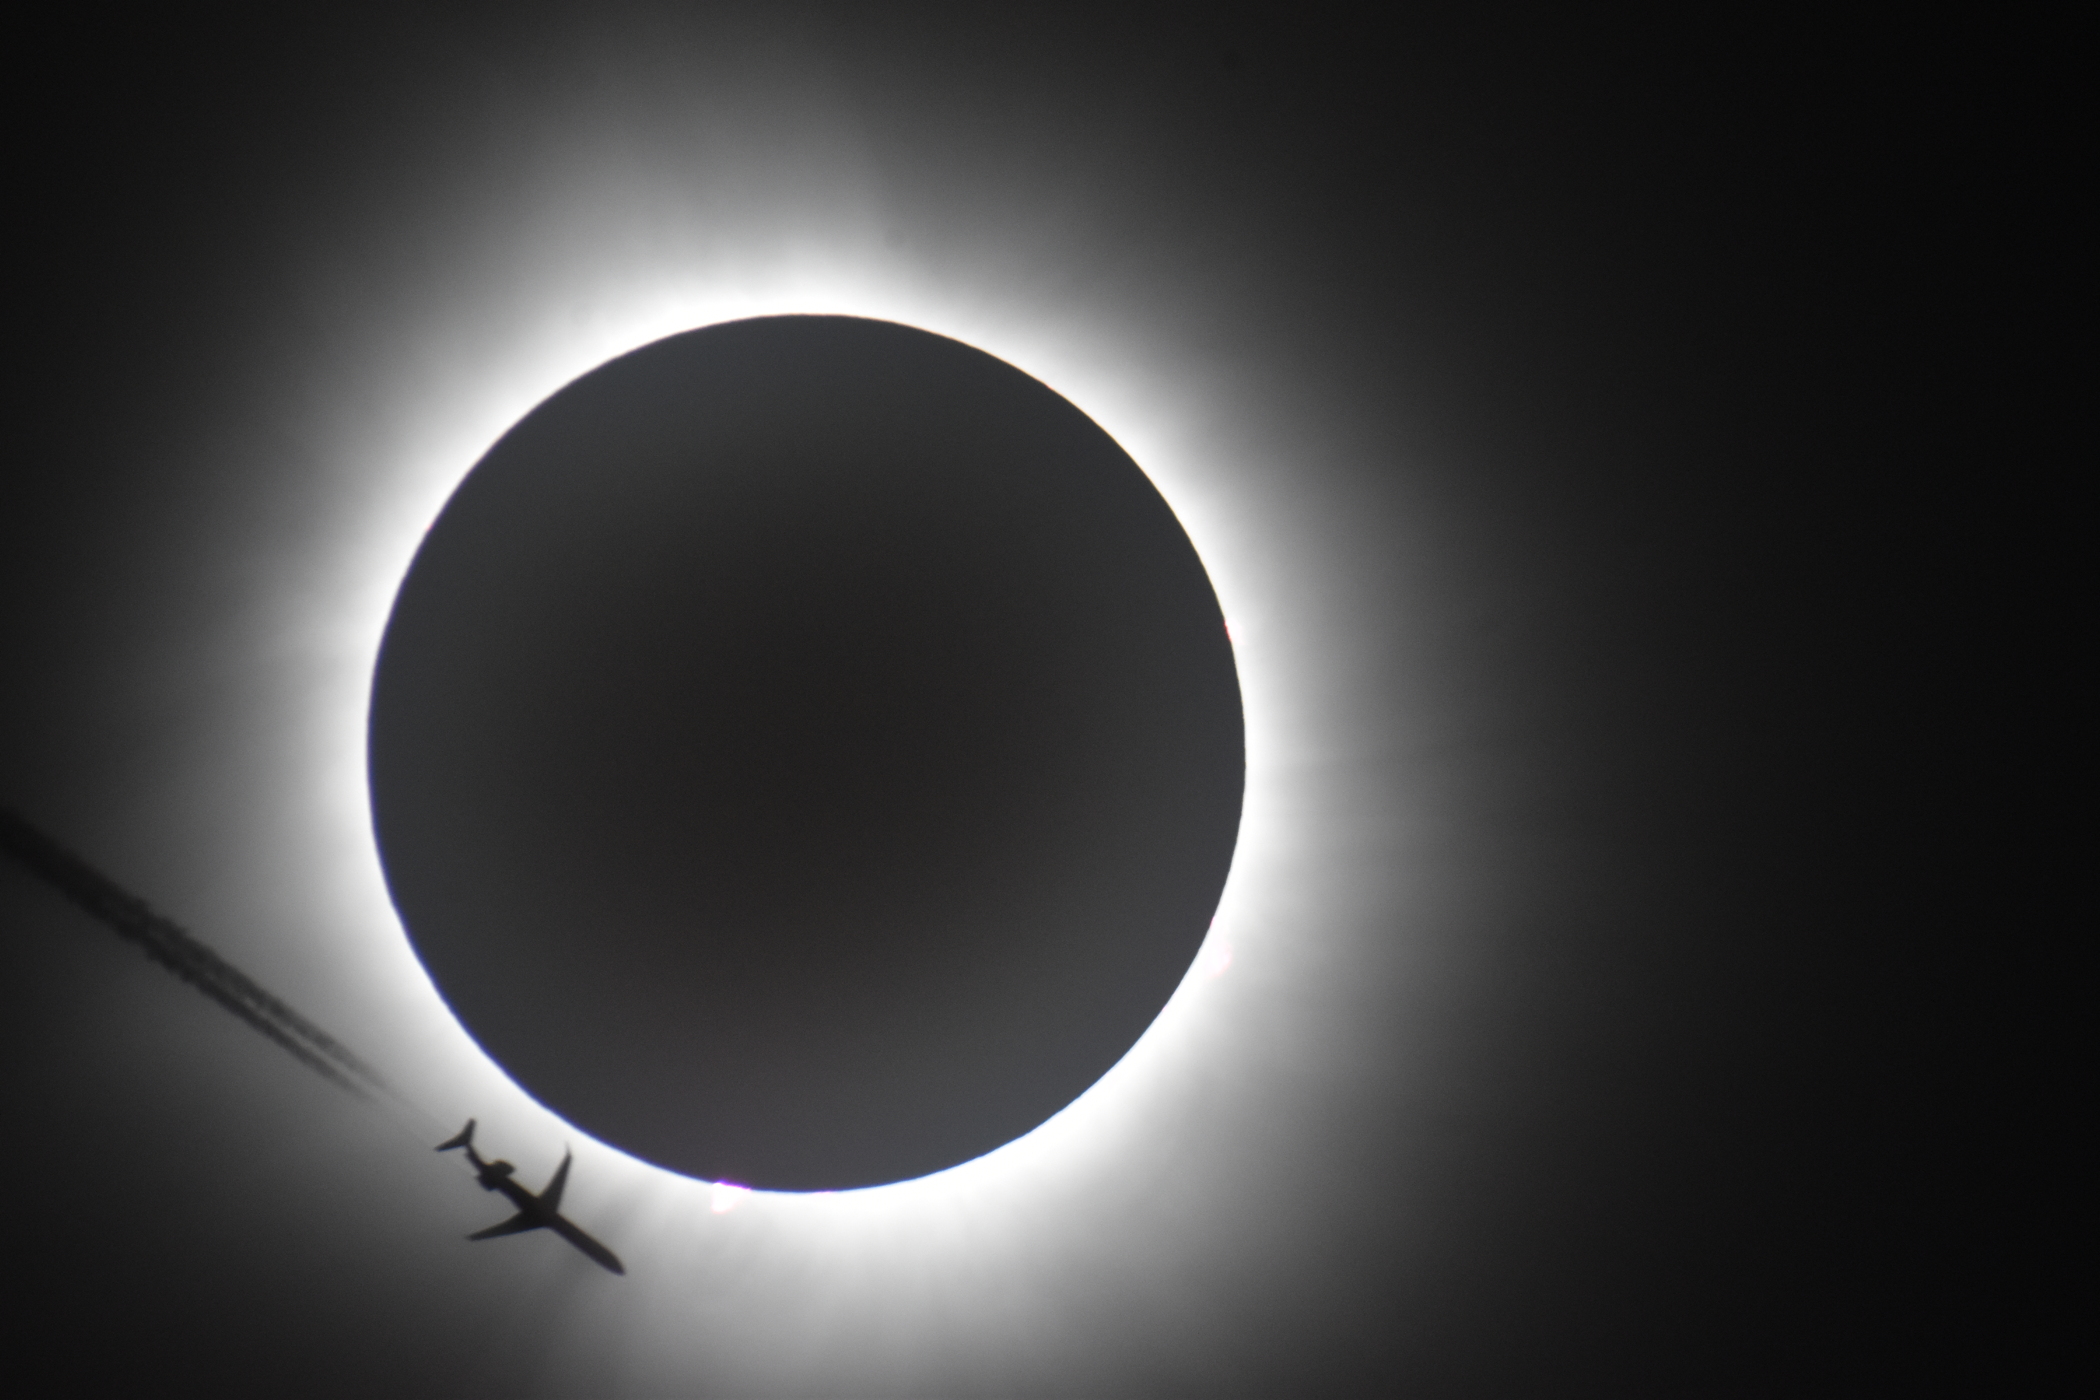 Lucky shot of airplane and eclipse